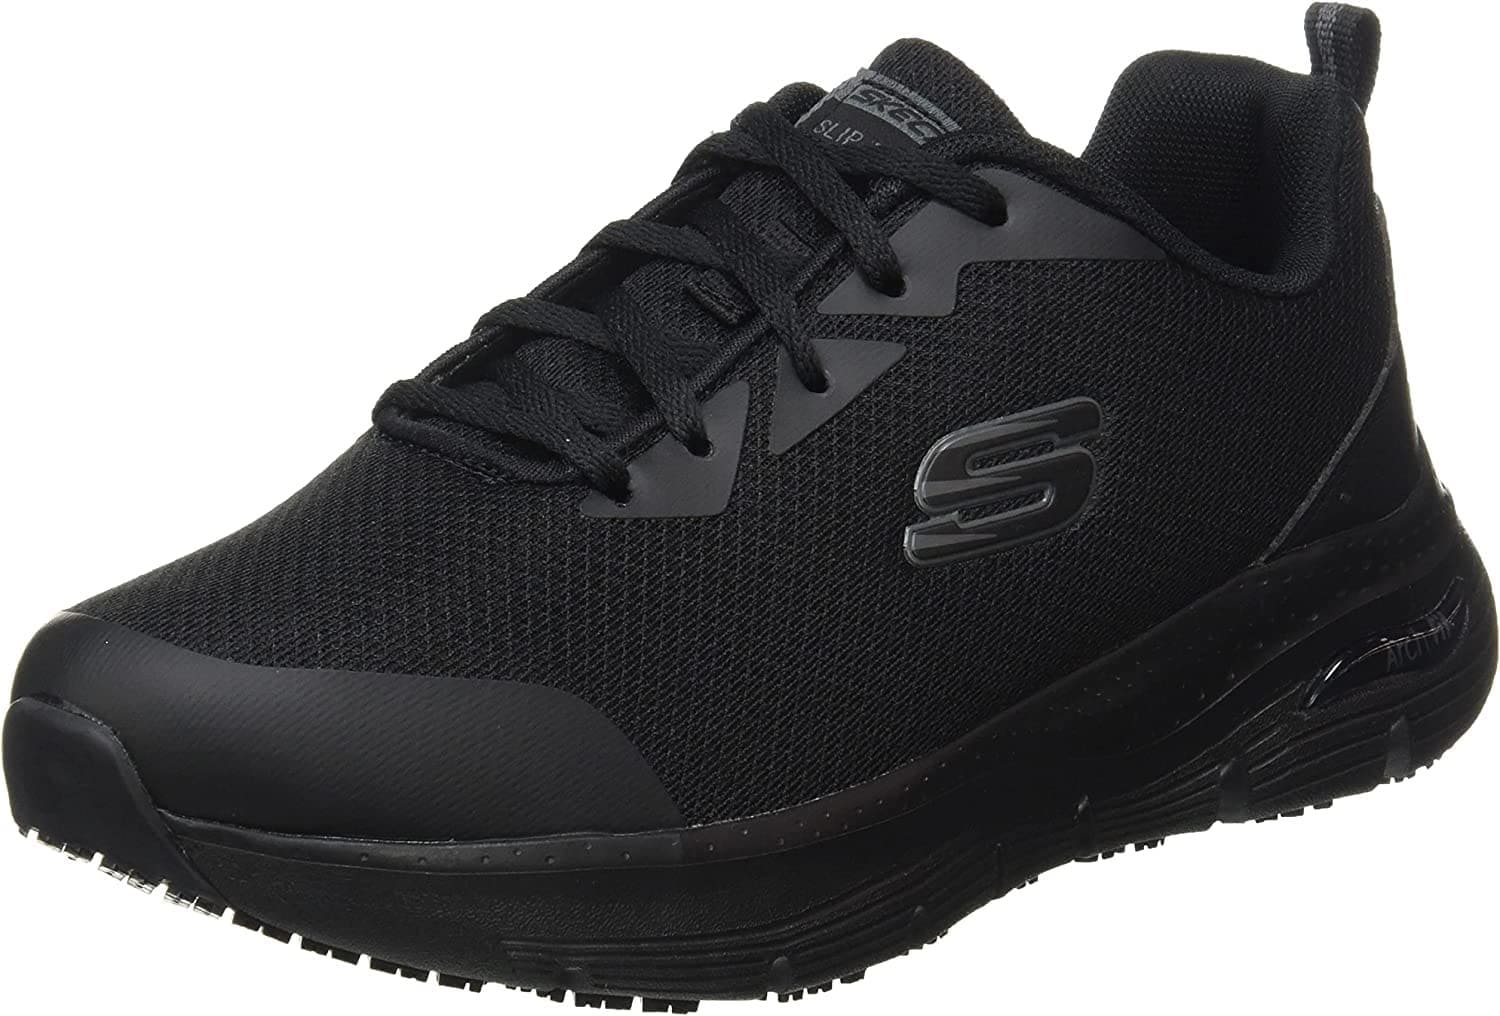 The perfect Skechers shoes for work: designed to last on your feet for ...